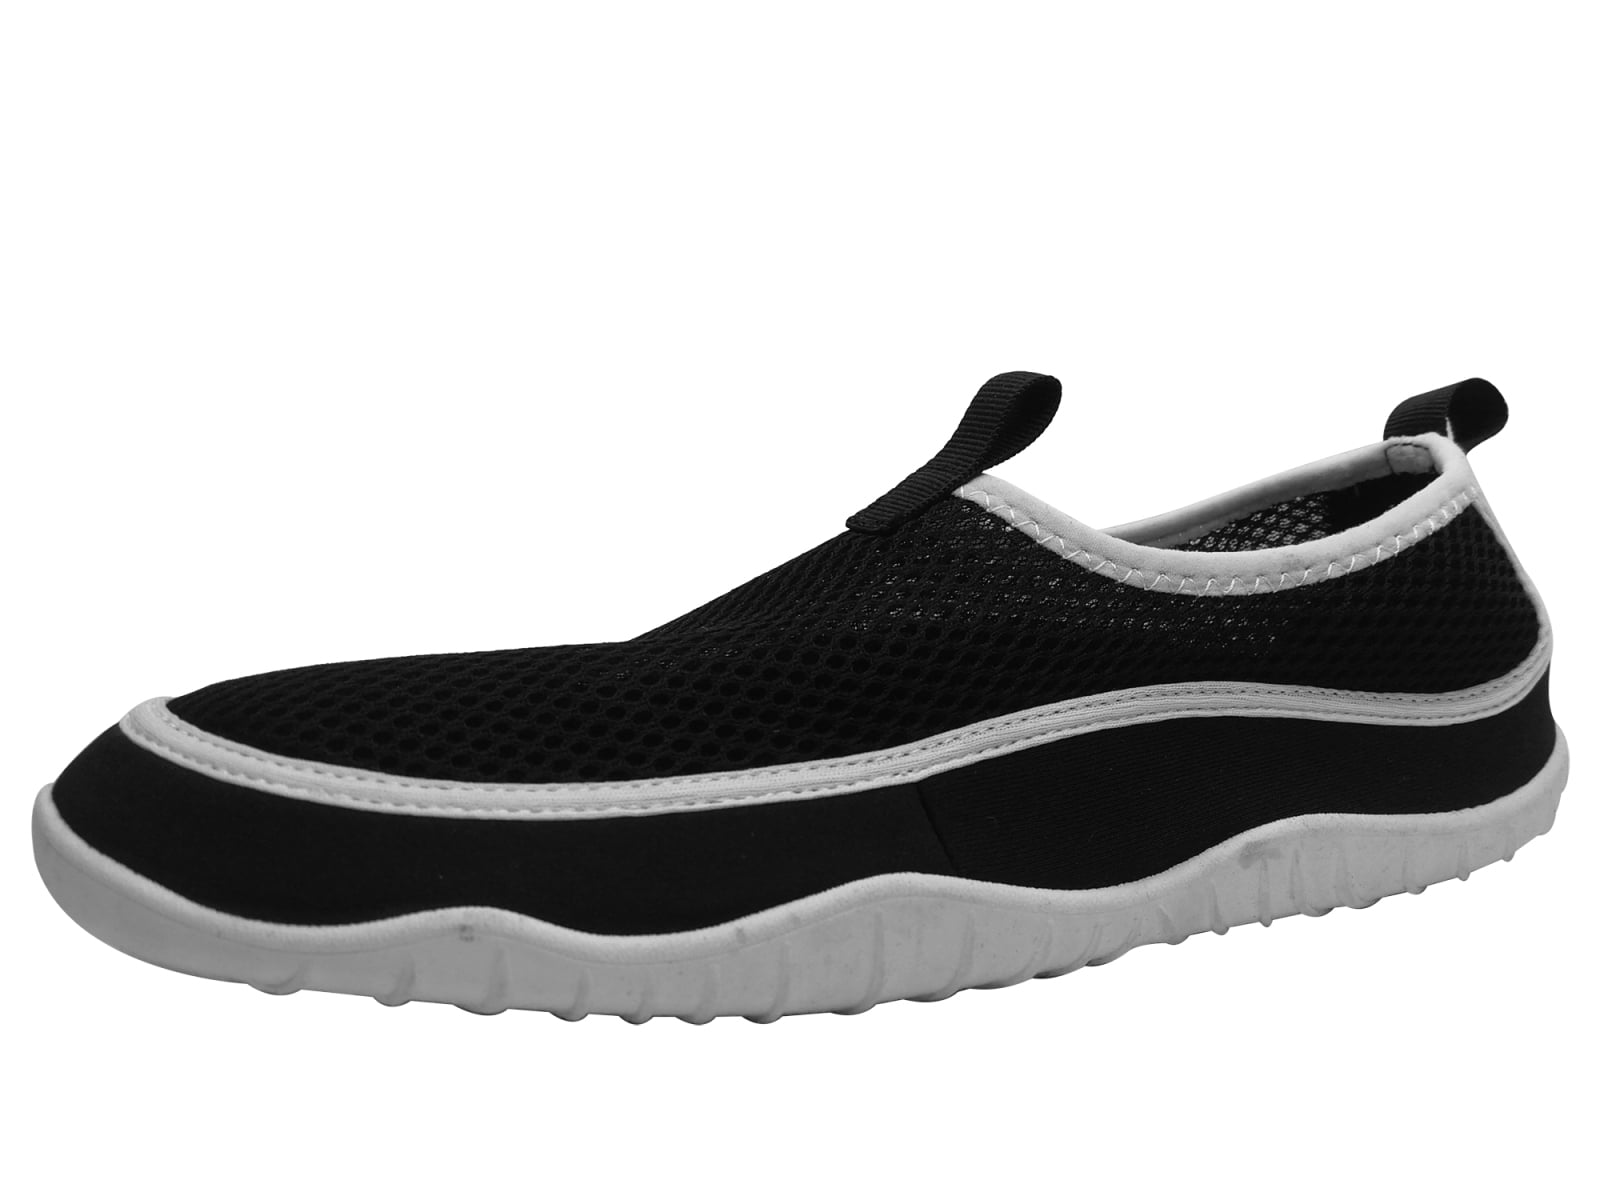 walmart athletic works water shoes